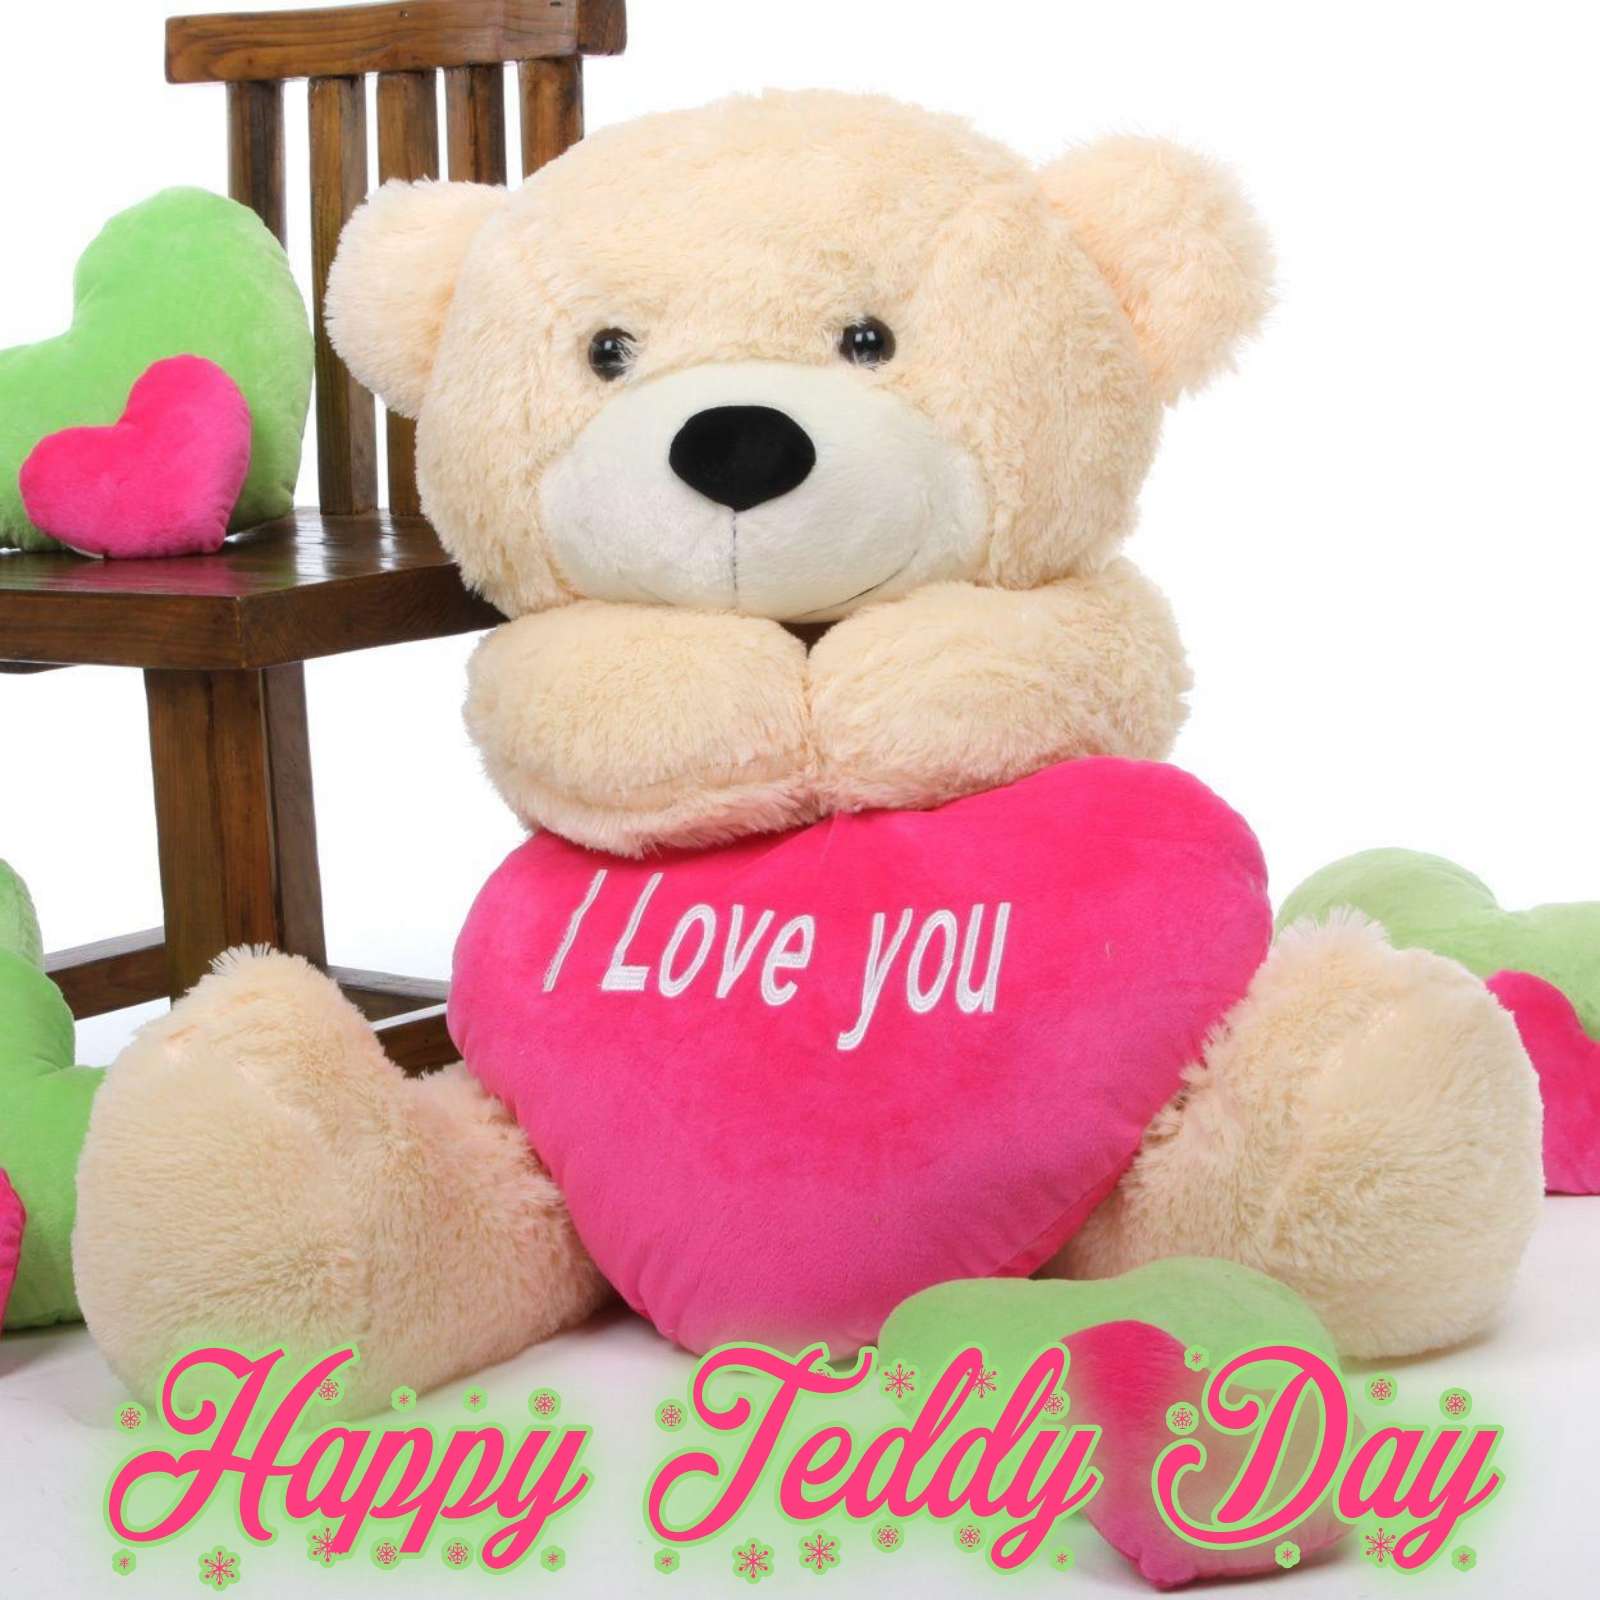 Love Teddy Day Images Download